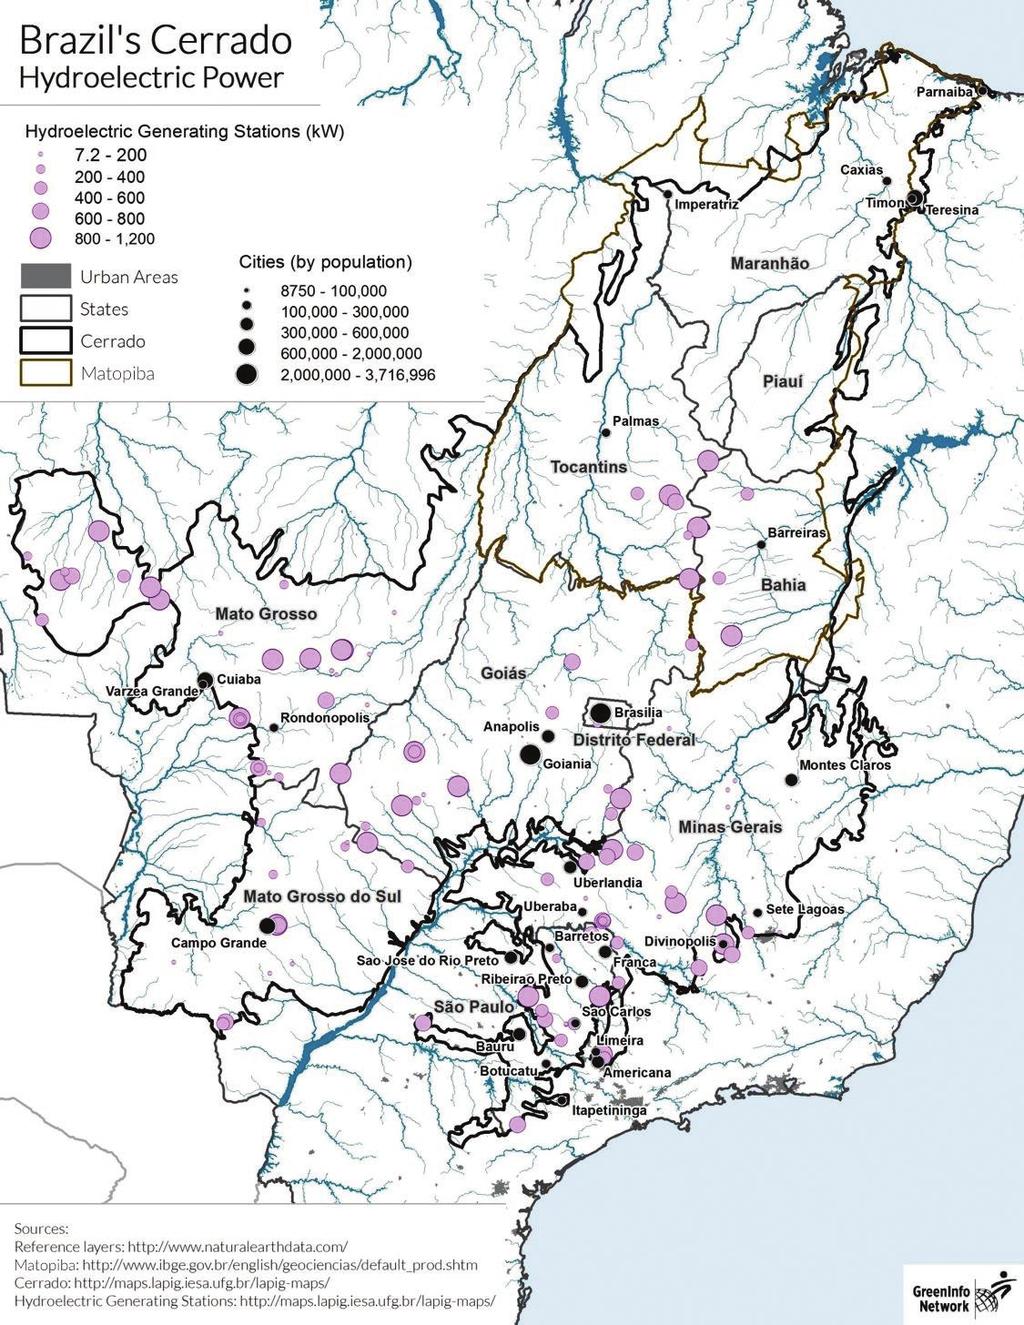 23 The Cerrado lies on top of important The aquifers. Cerrado has These a mix of aquifers large are not and yet small stressed, dams, but pollution ranging and from over 7.